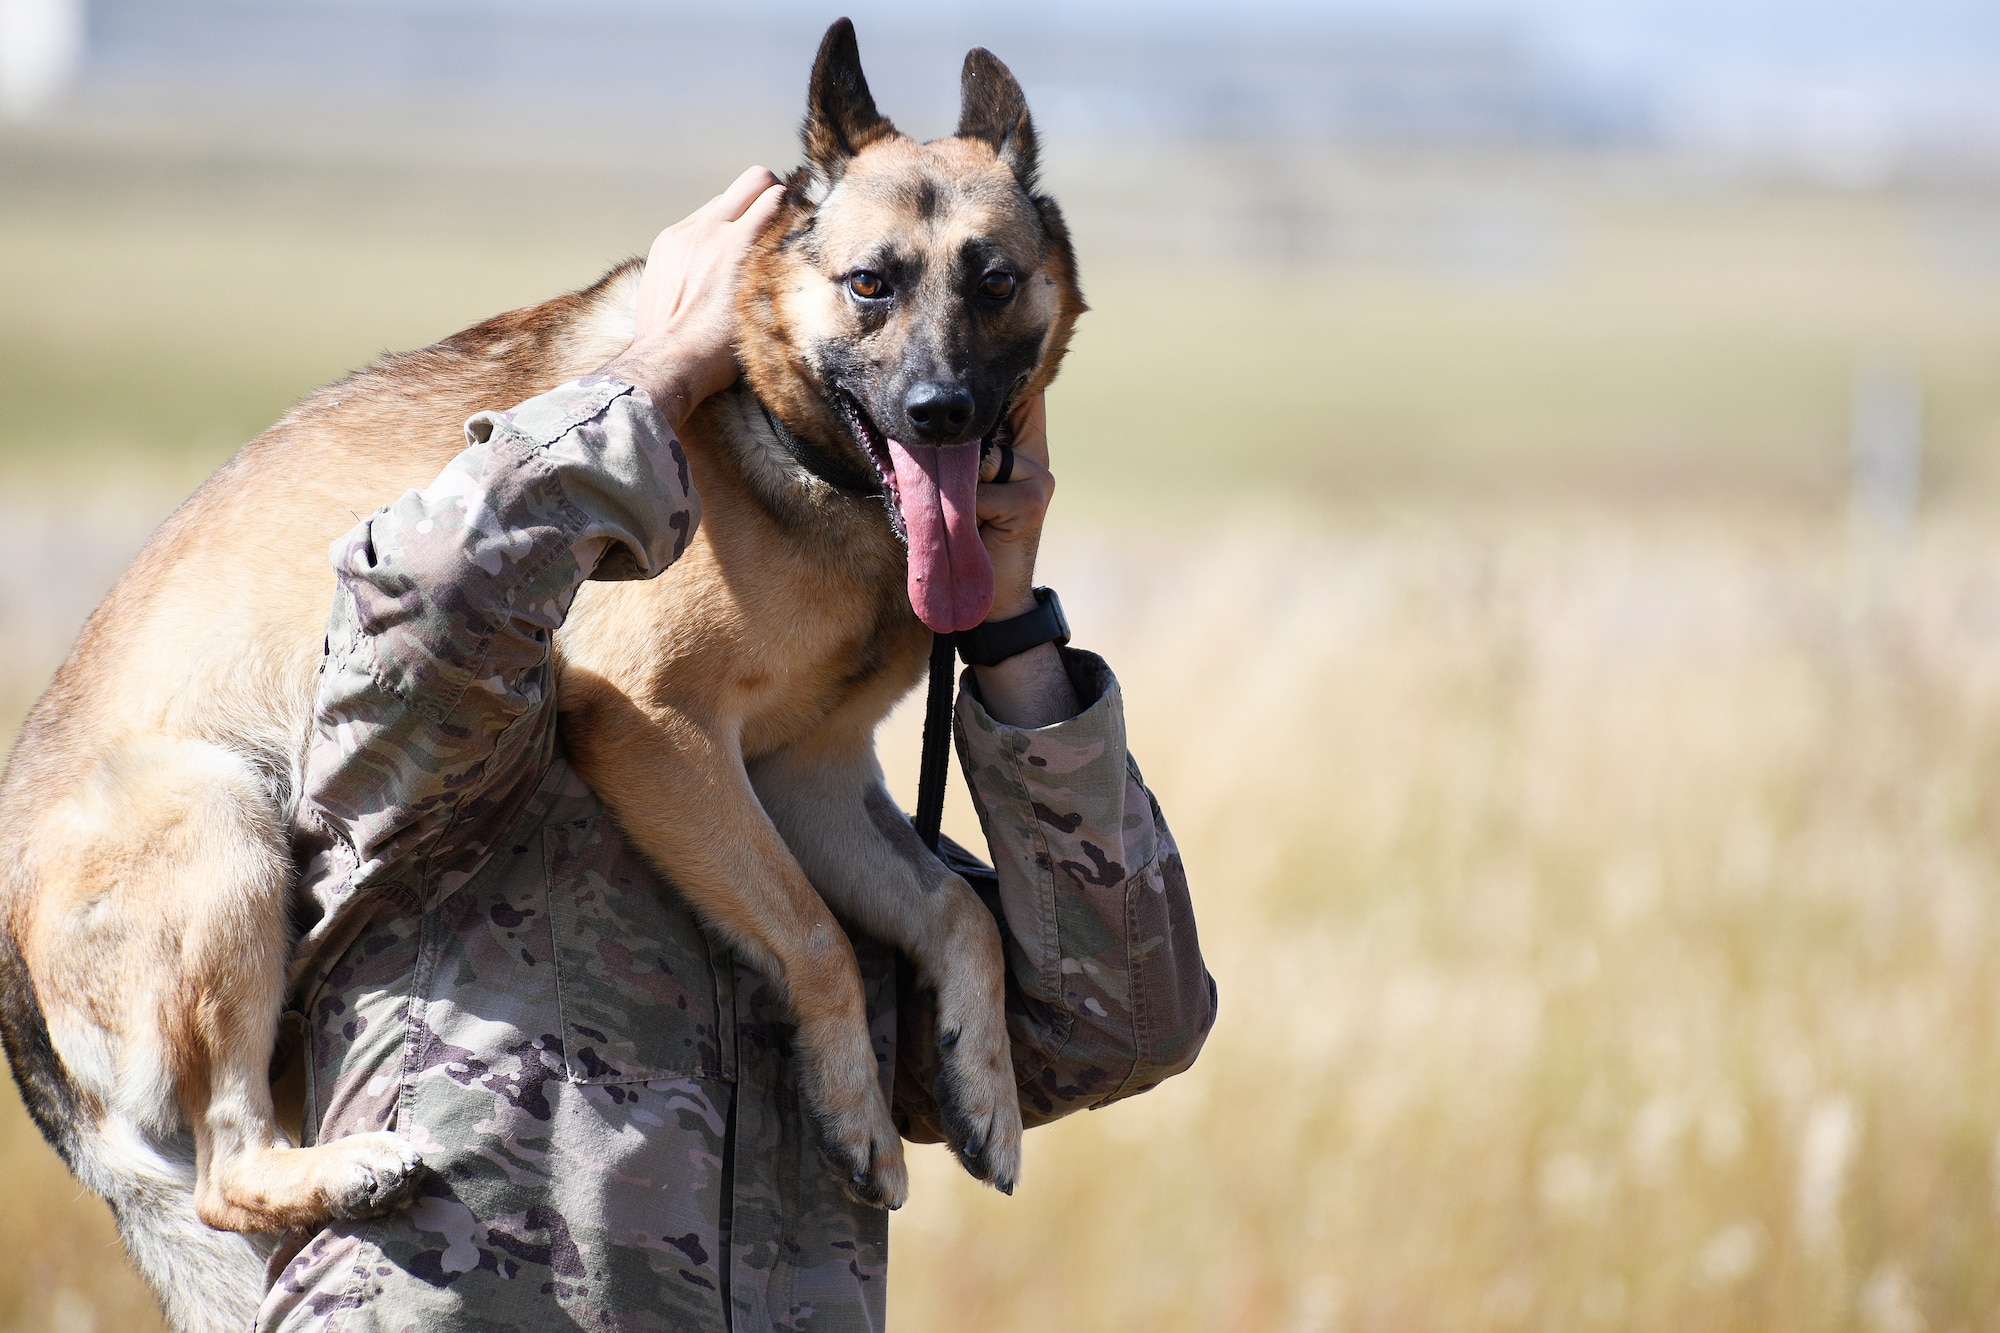 Staff Sgt. Vincent Mendez, 341st Security Forces Squadron MWD handler carries MWD Kay during sound detection training Aug. 26, 2020, at Malmstrom Air Force Base, Mont.